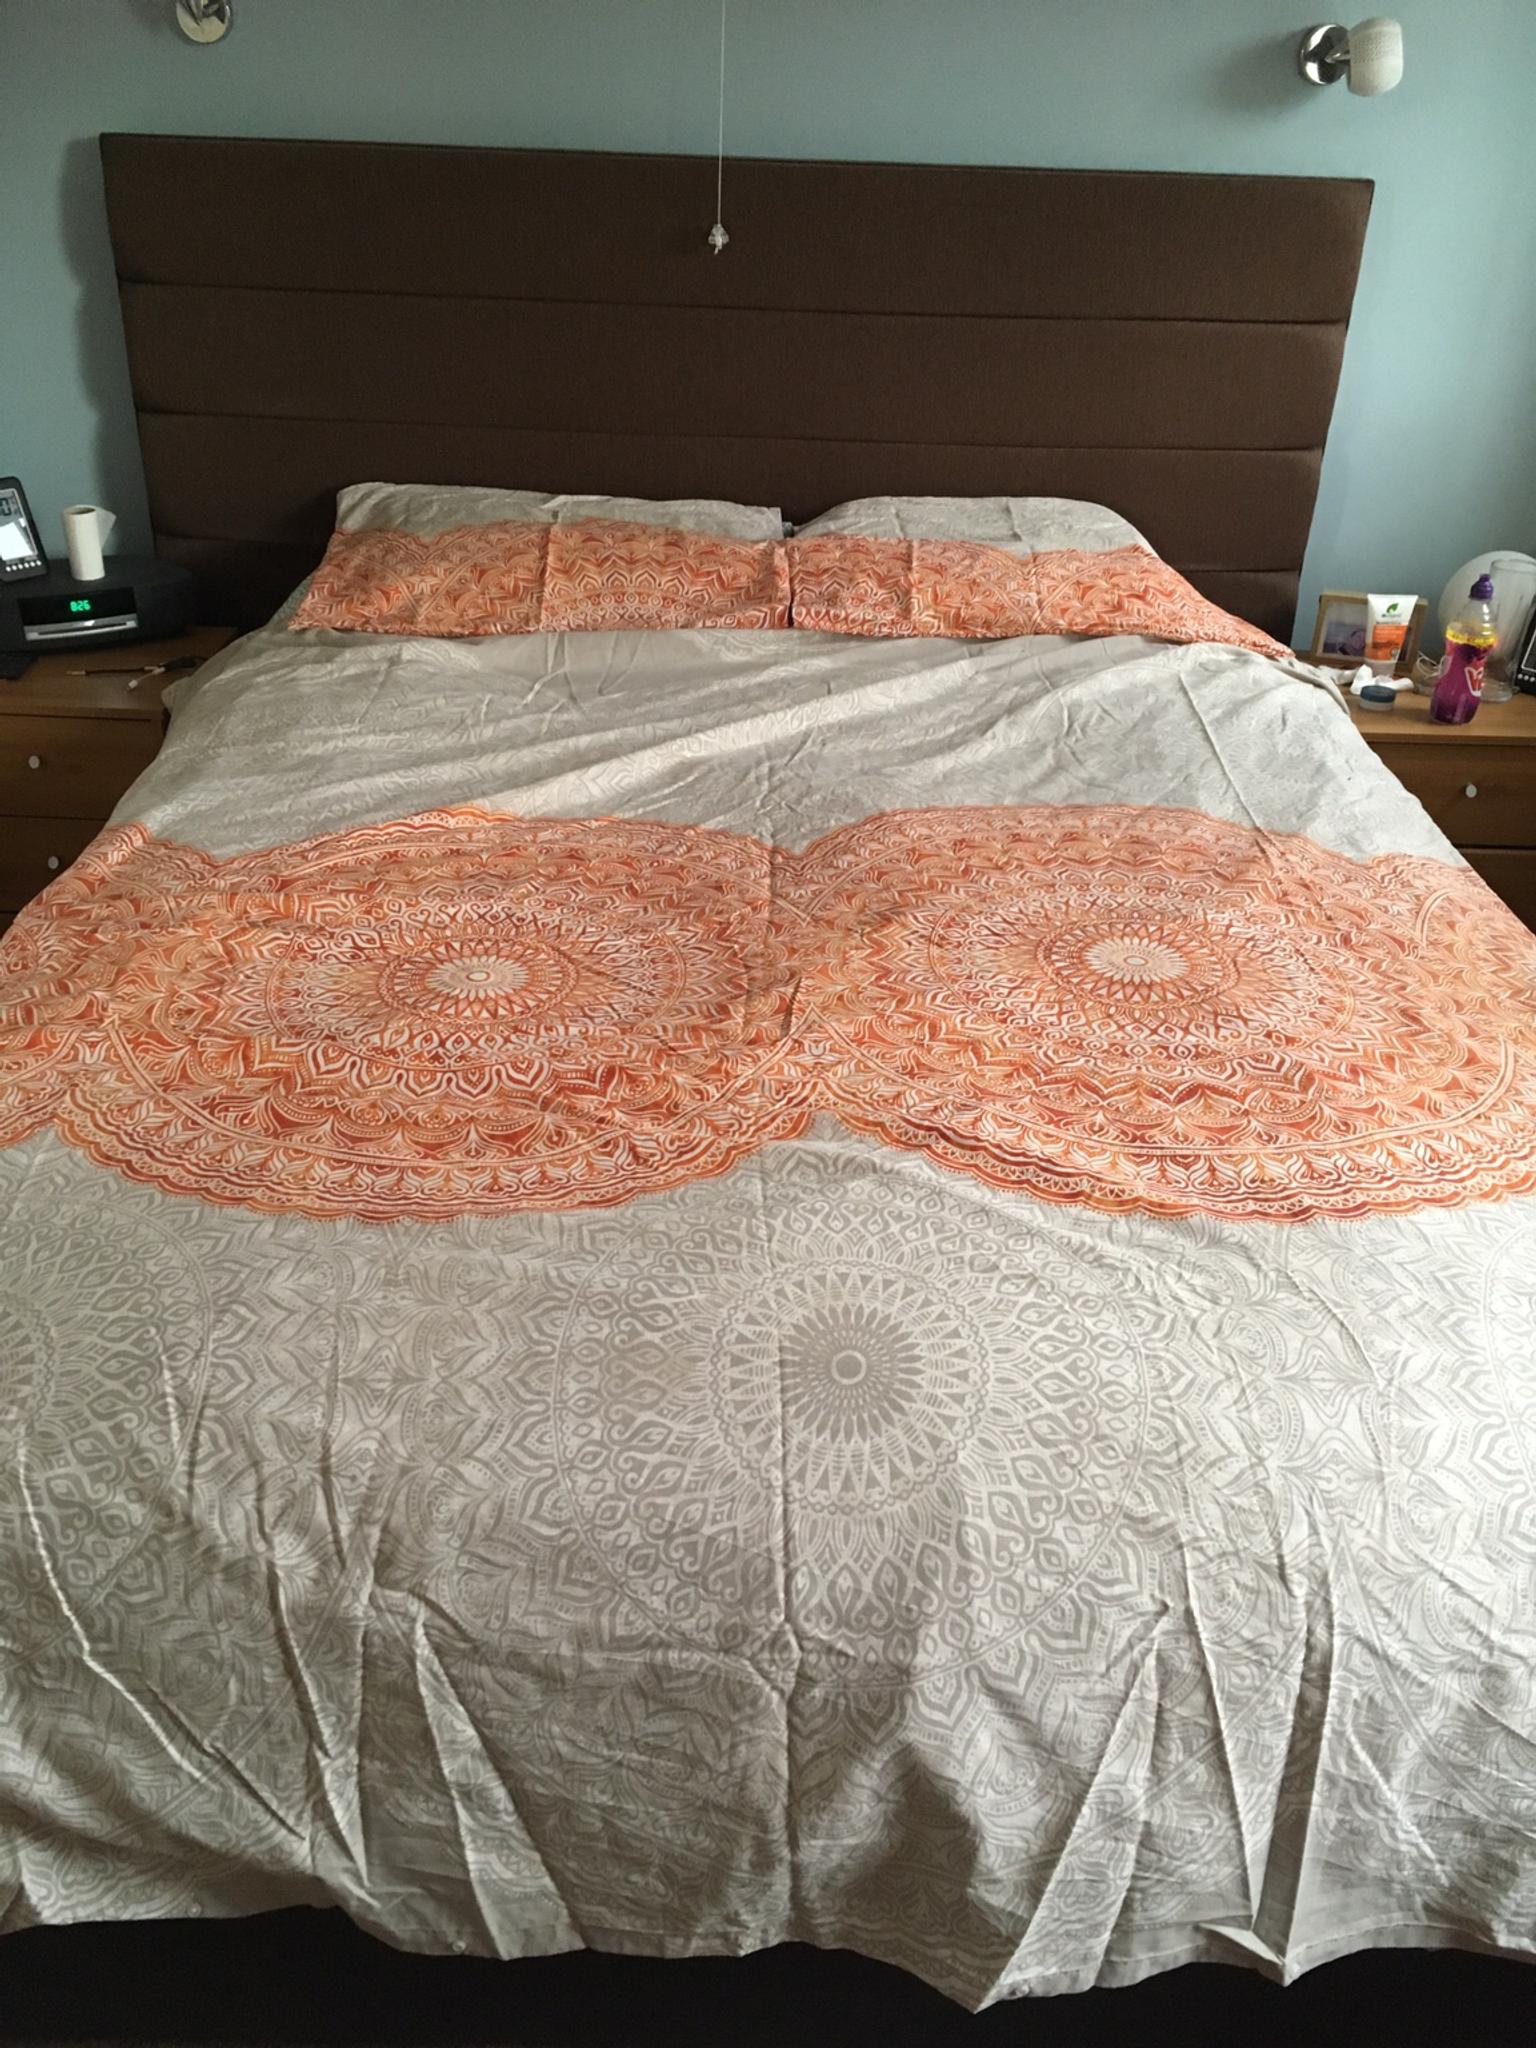 Orange Moroccan Style Duvet King Size In Dy8 Dudley For 5 00 For